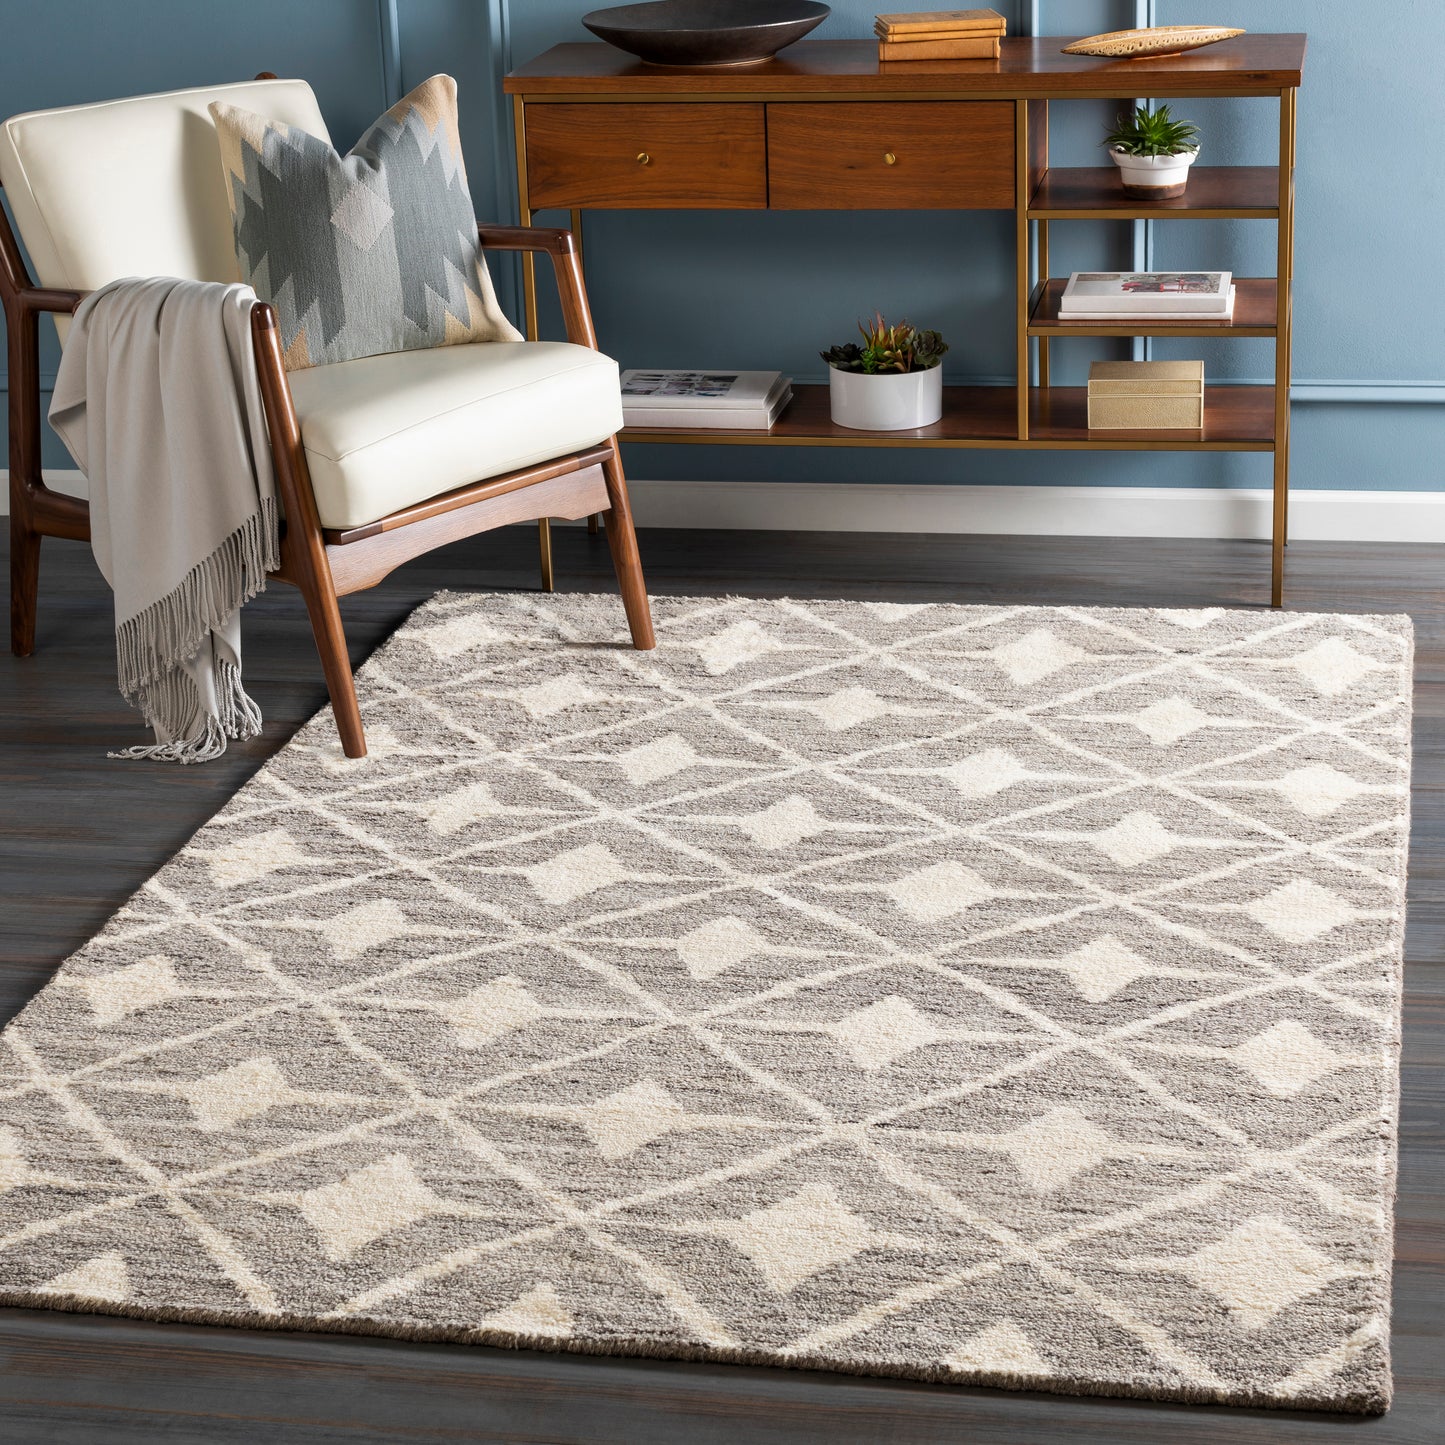 Fez 23584 Hand Knotted Wool Indoor Area Rug by Surya Rugs